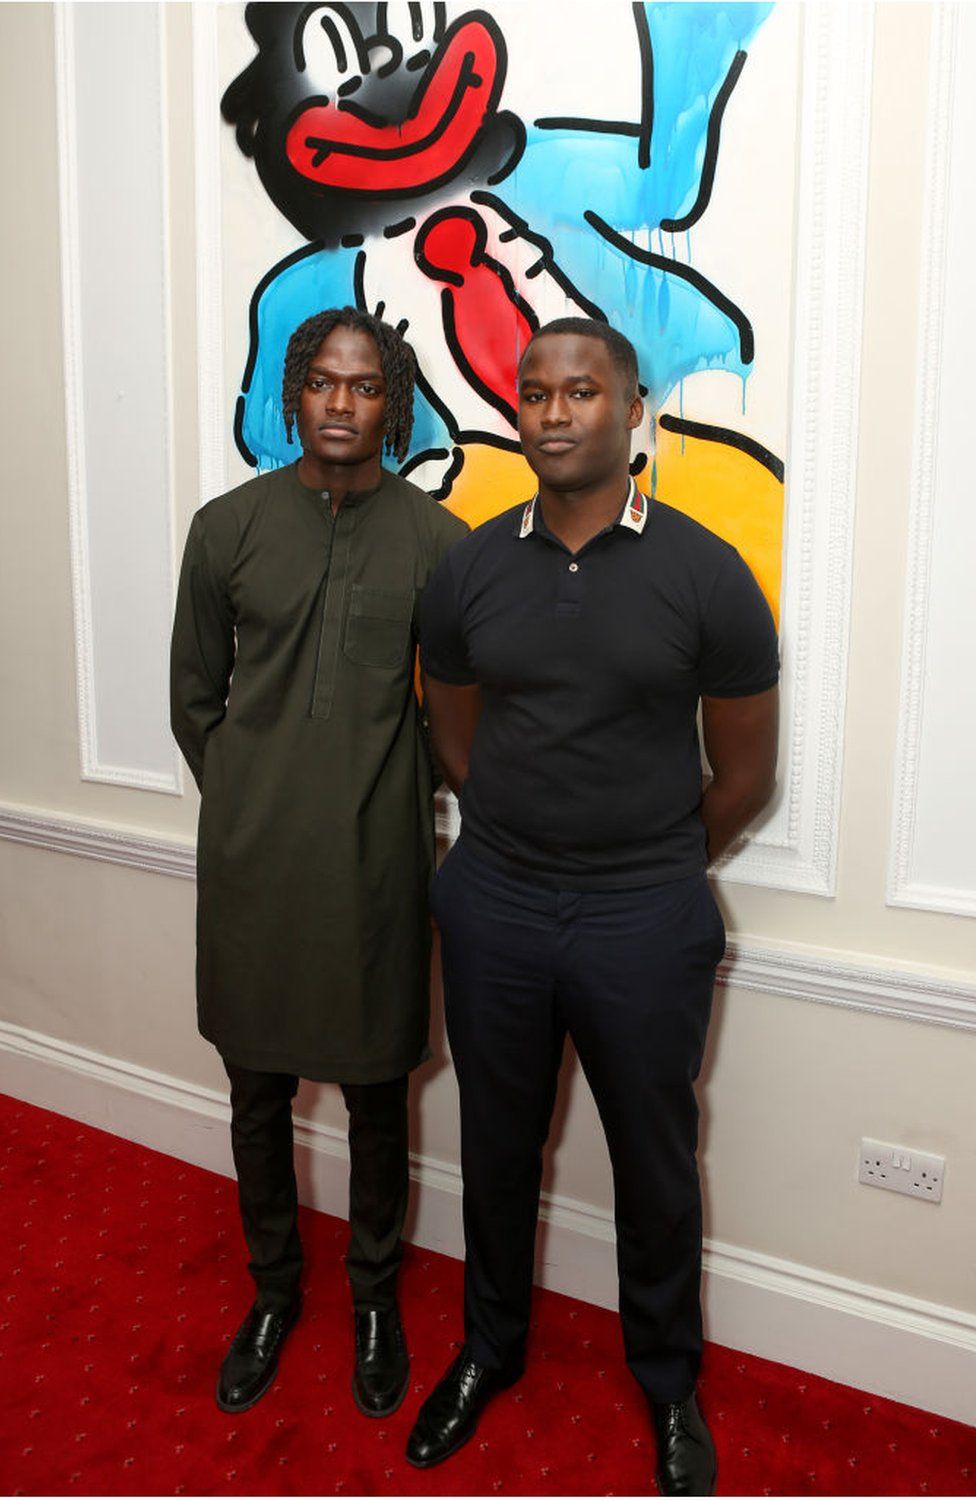 Two men wearing black standing in front of a colourful piece of work, which appears to show a figure in black face, with large red lips.